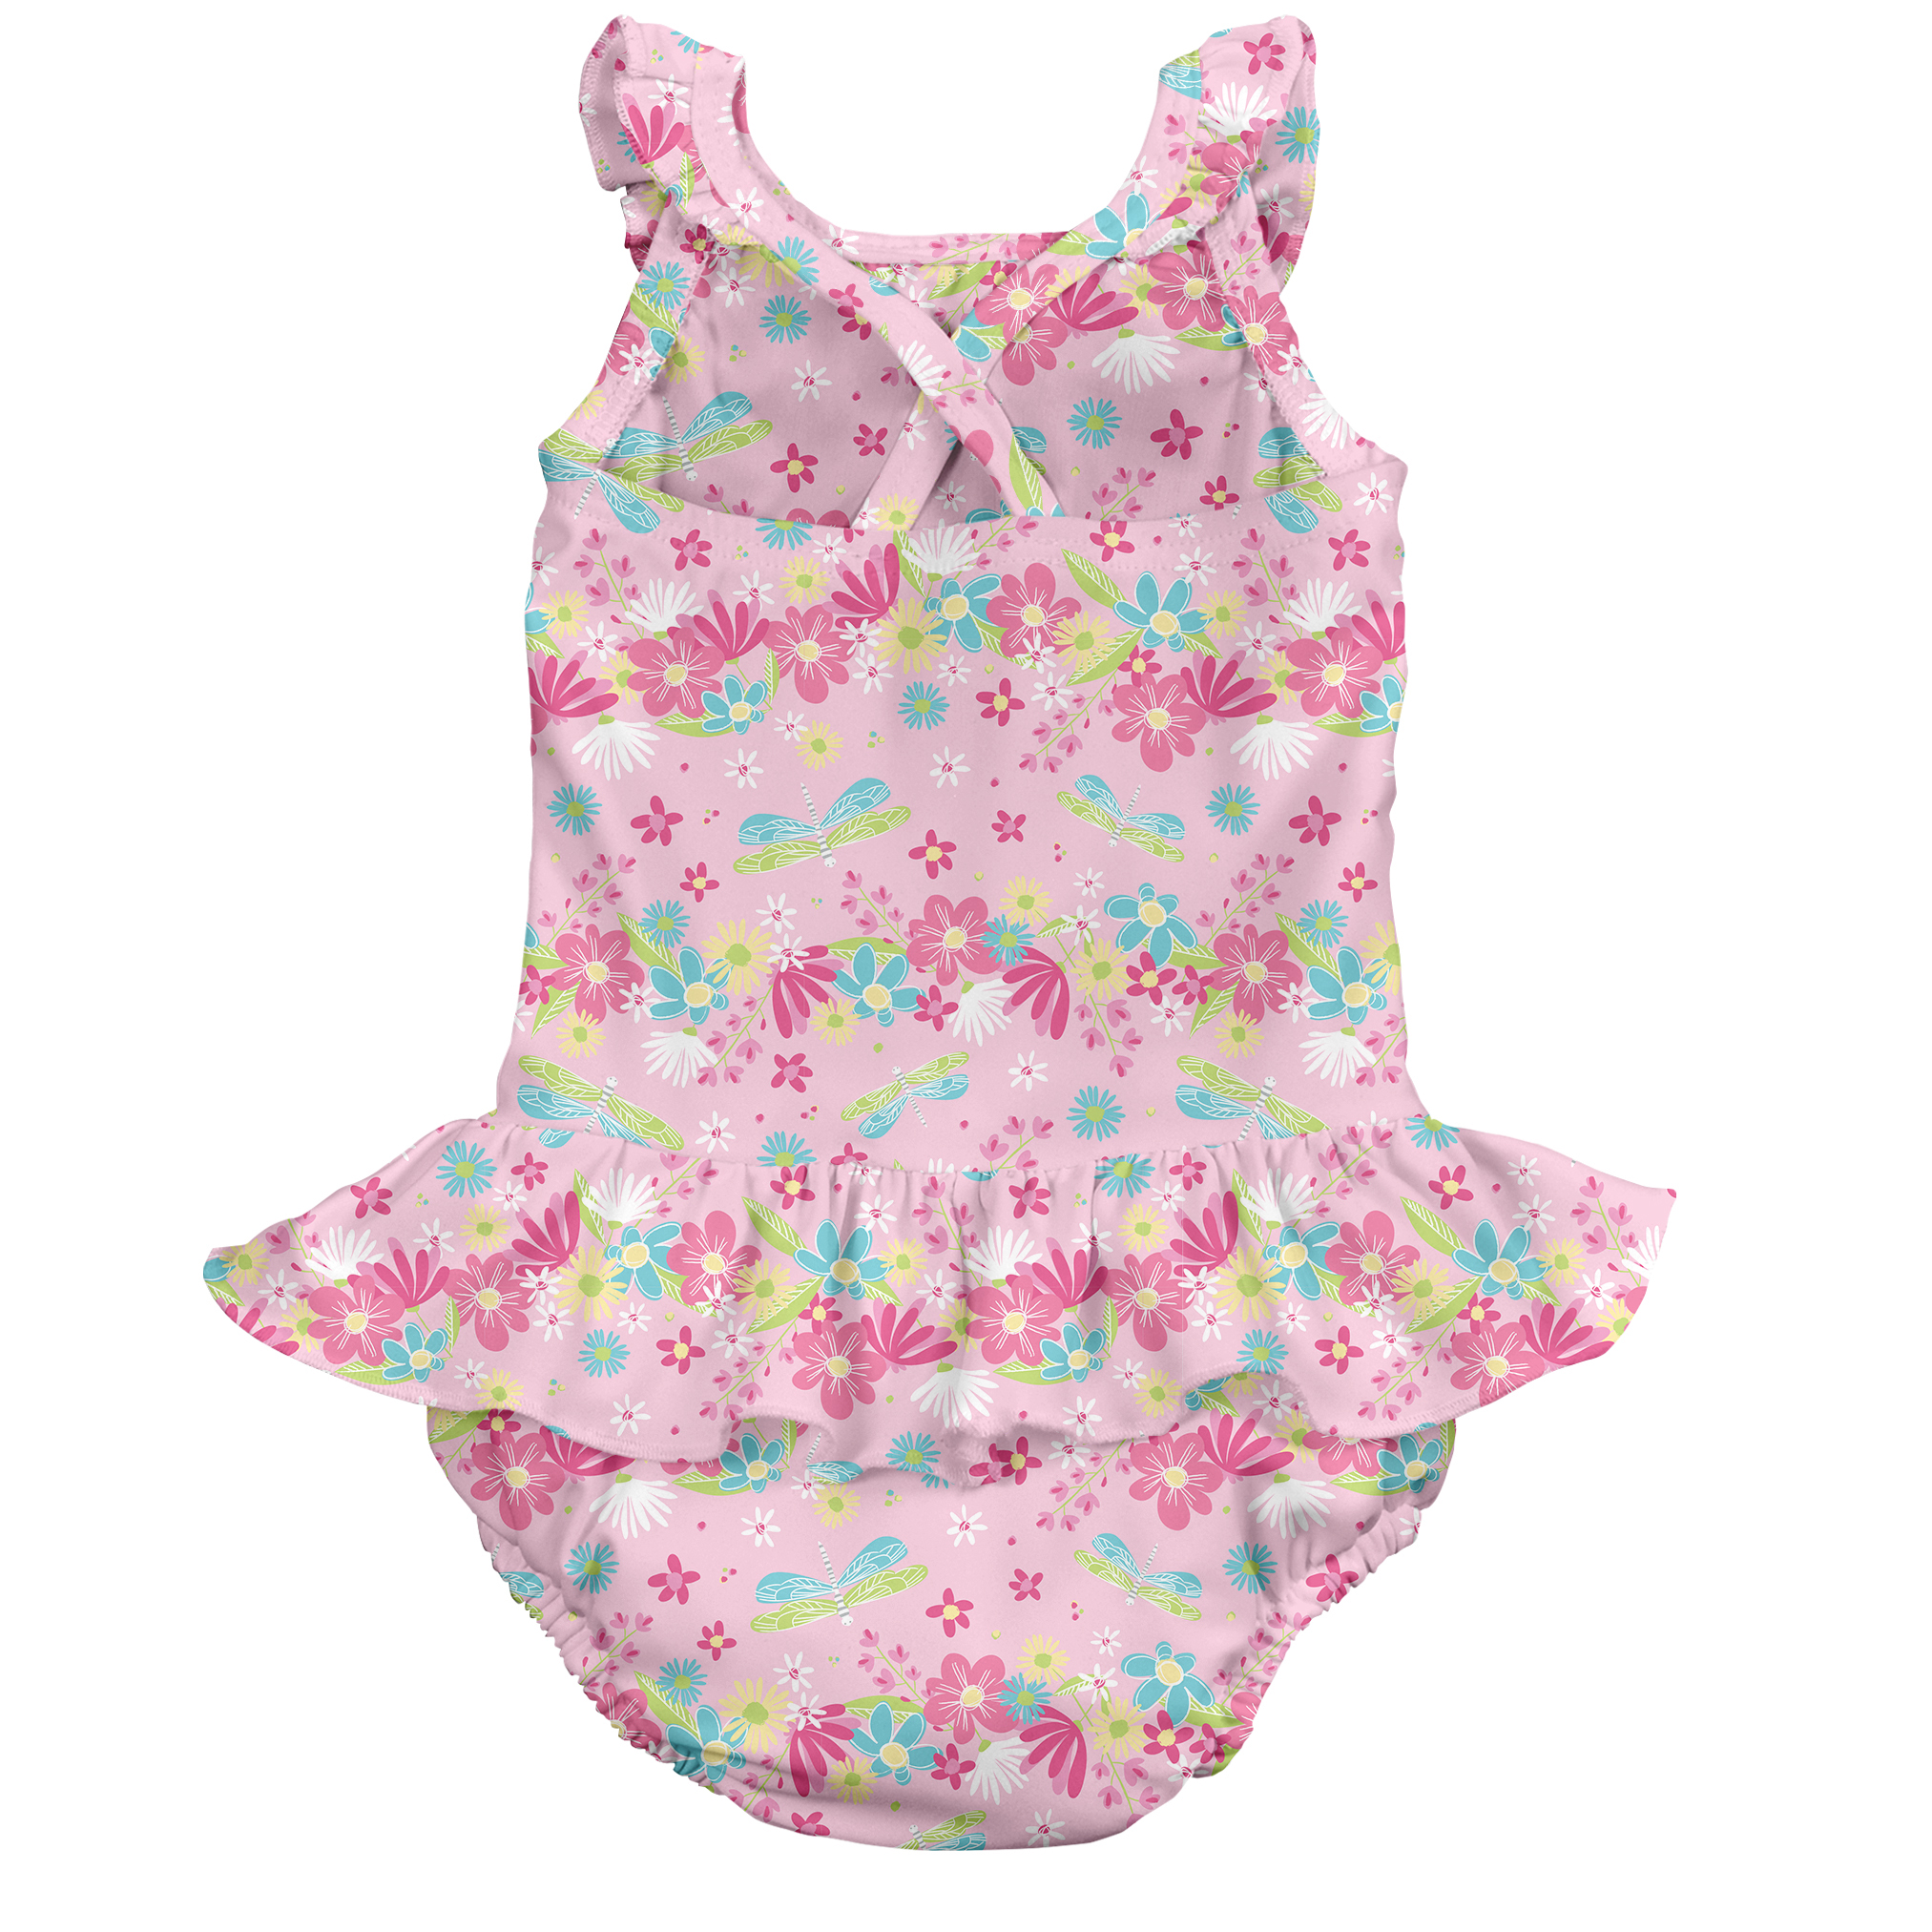 i play. Baby and Toddler Girls One-Piece Swimsuit with Built-in Reusable Absorbent Diaper - image 2 of 4